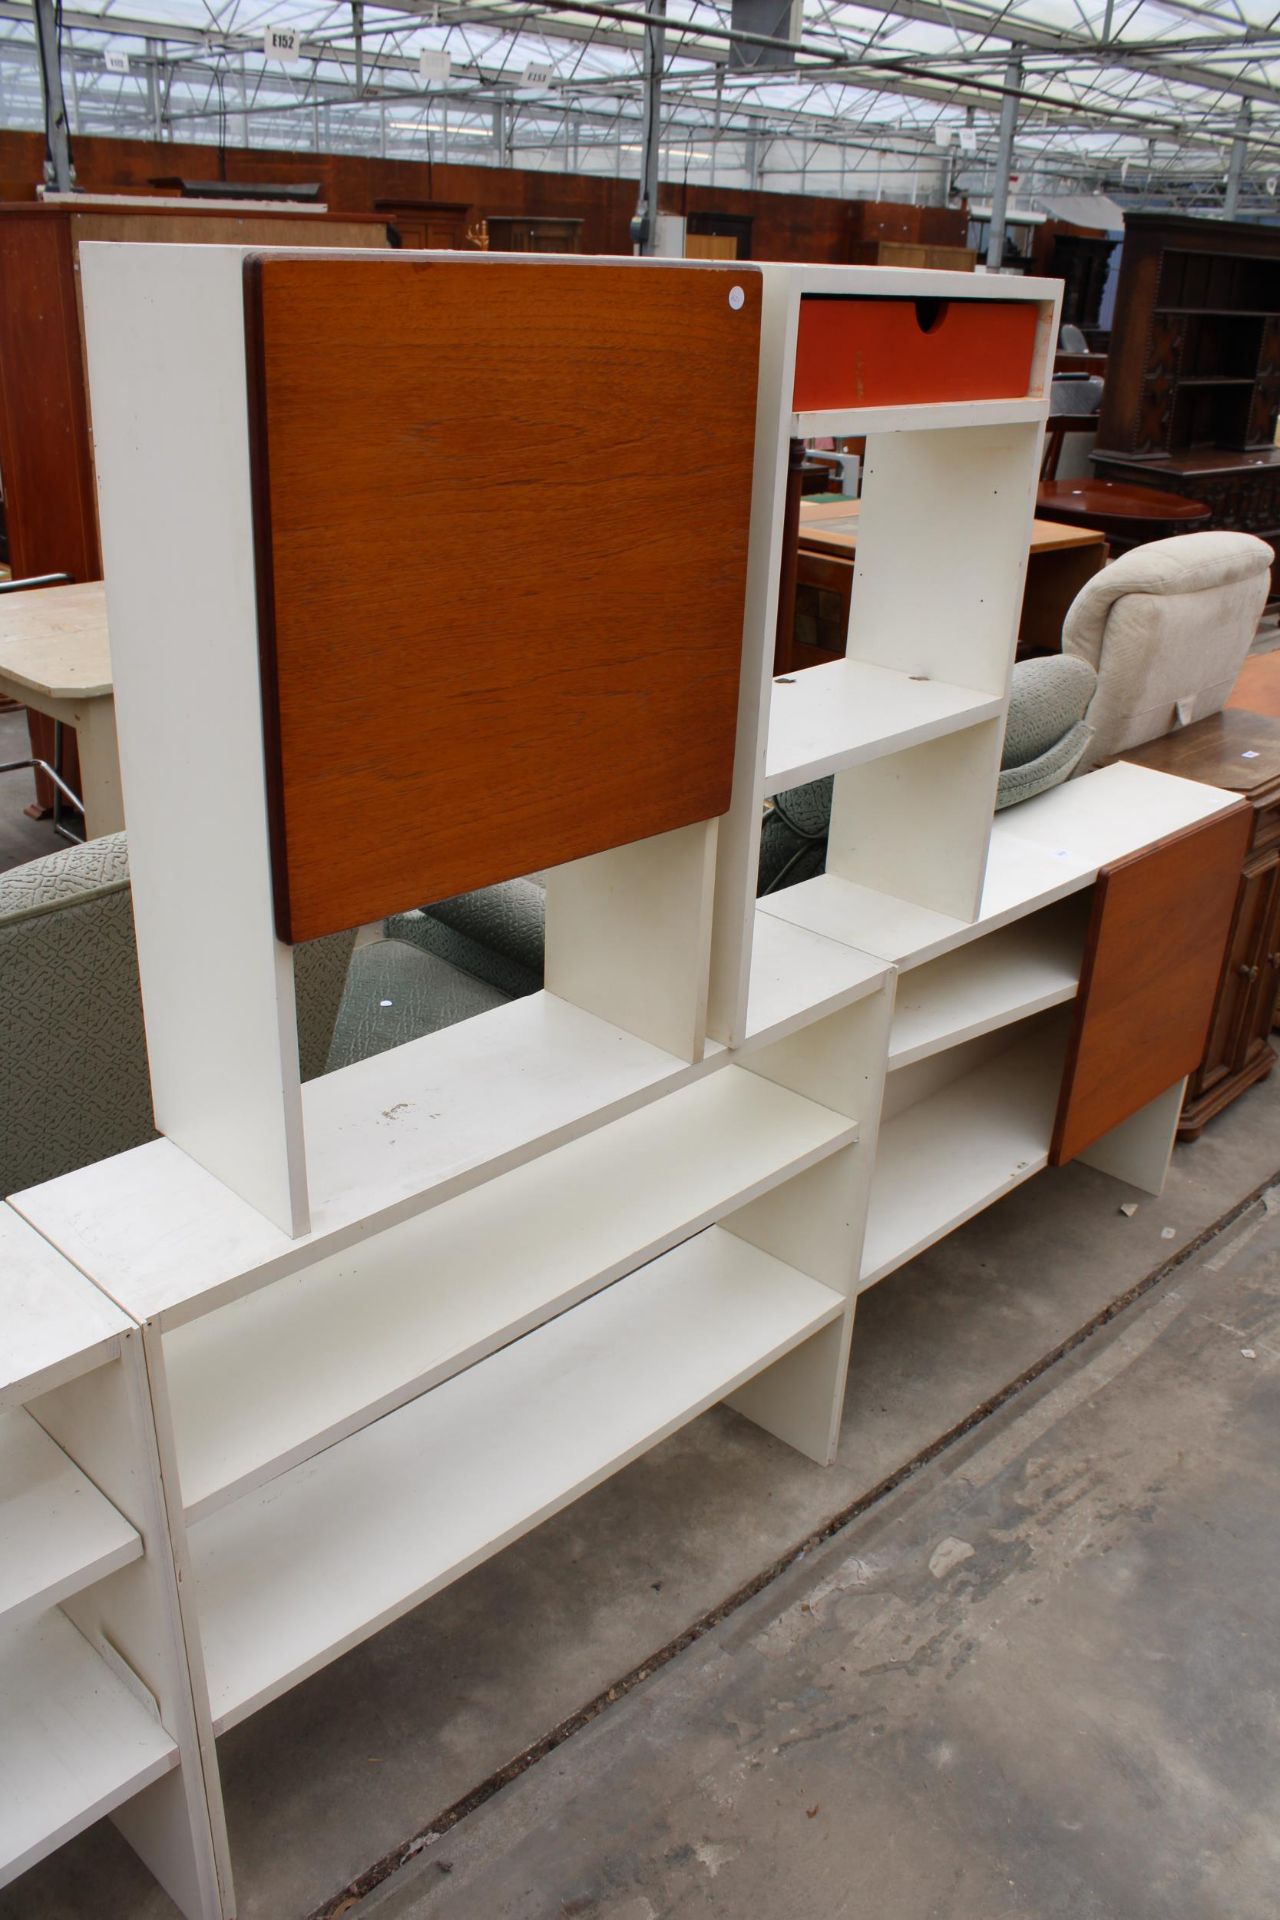 FIVE VARIOUS WHITE STORAGE SHELVES, TWO WITH TEAK DOORS - Image 2 of 2